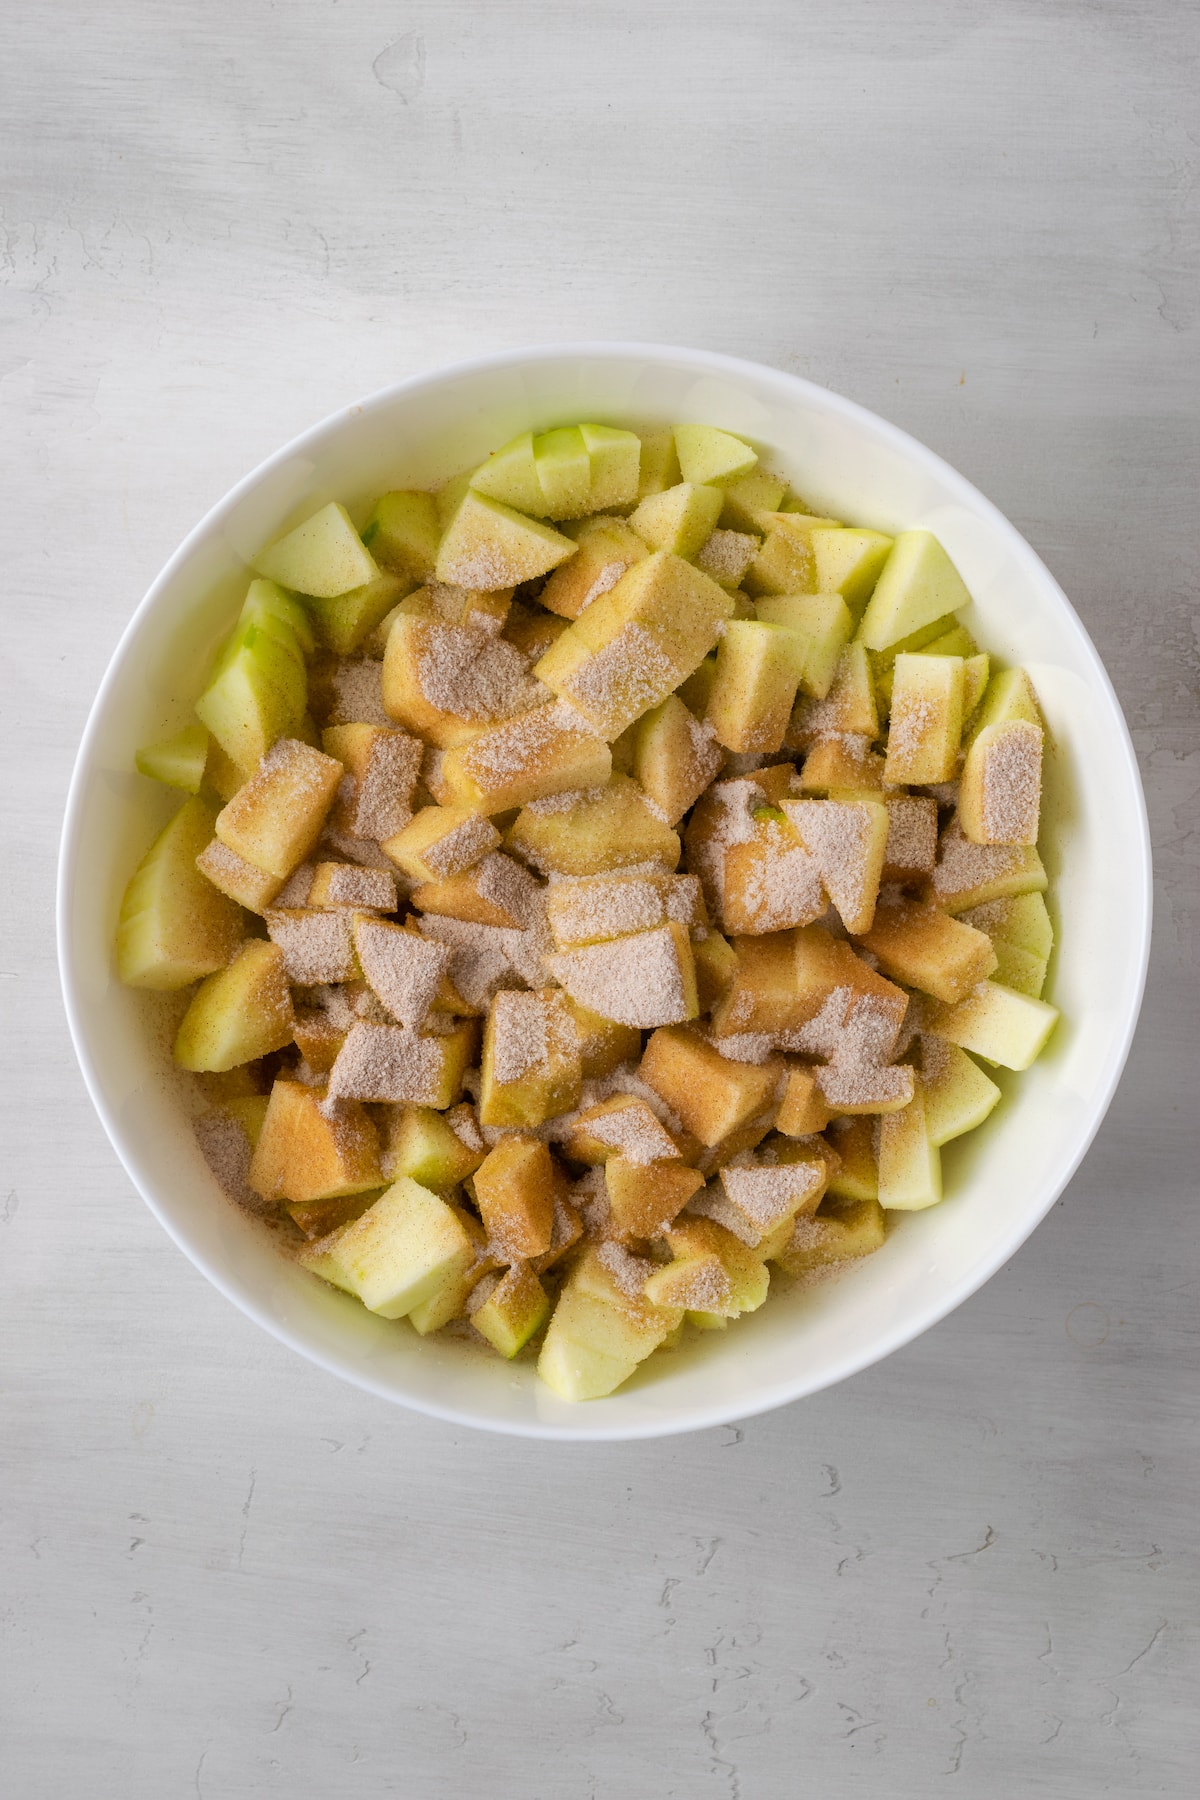 Apple slices covered with cinnamon sugar in a large white bowl.